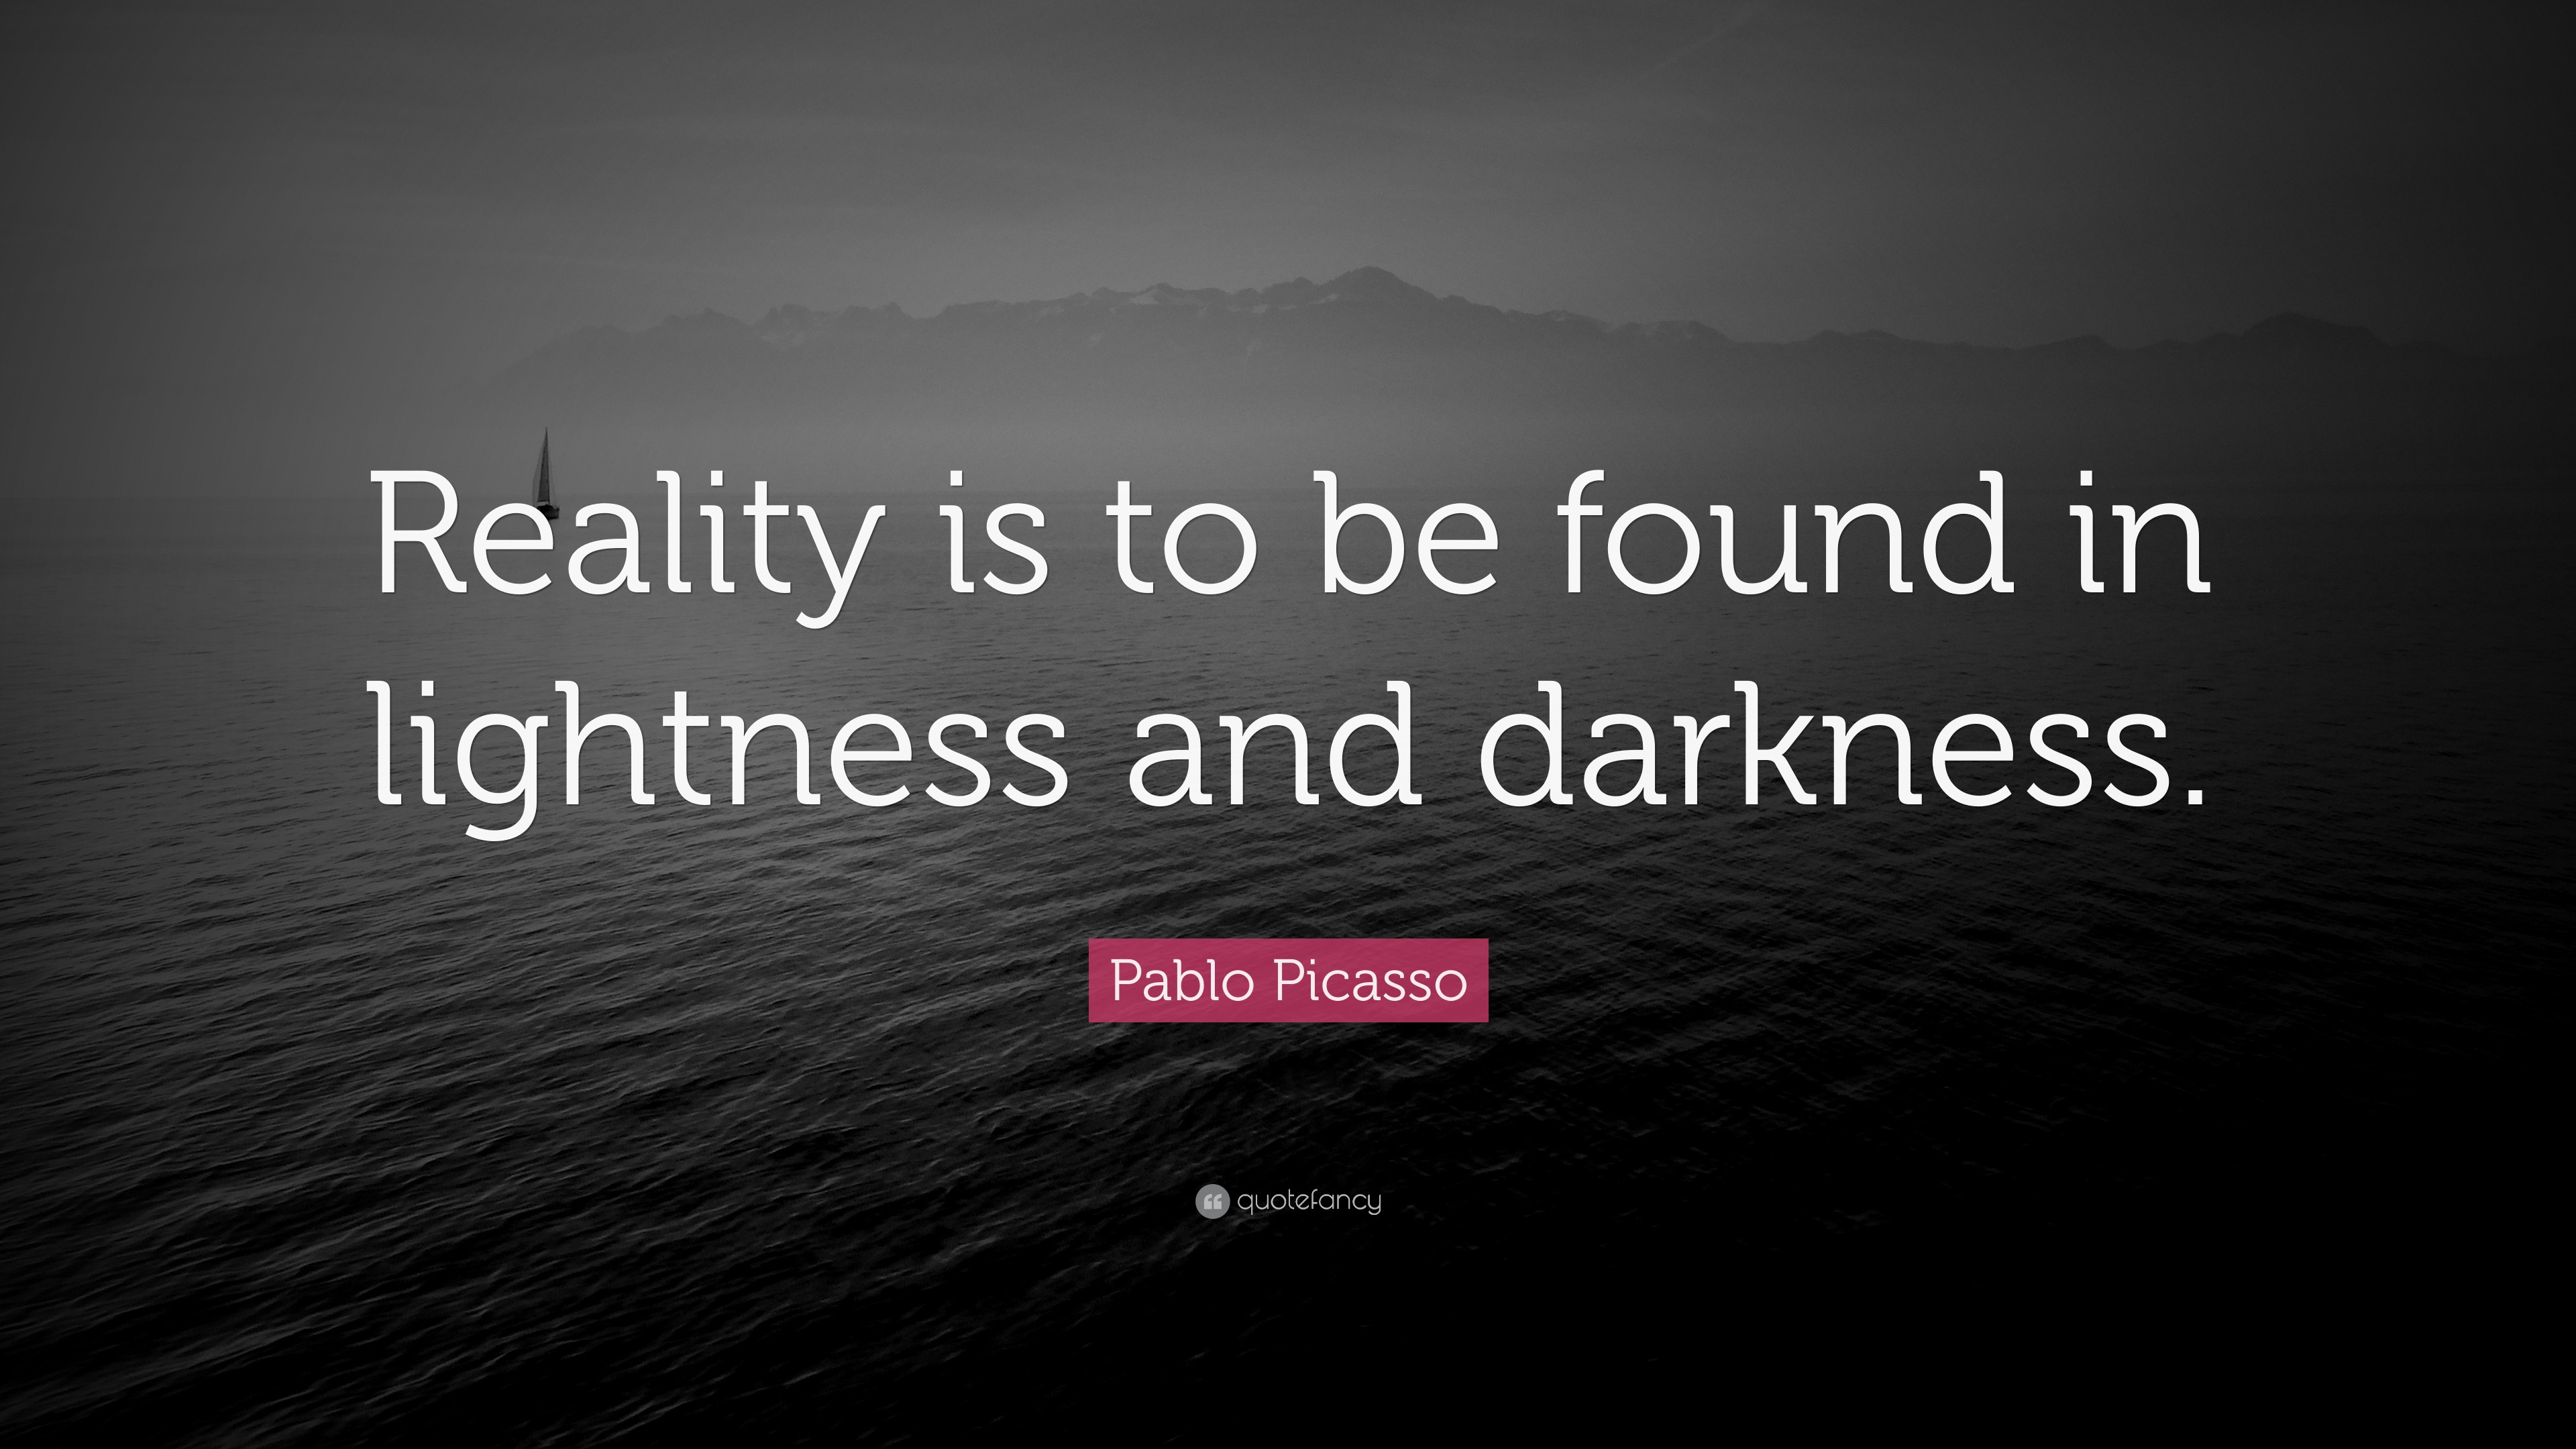 Pablo Picasso Quote: “Reality is to be found in lightness and darkness ...